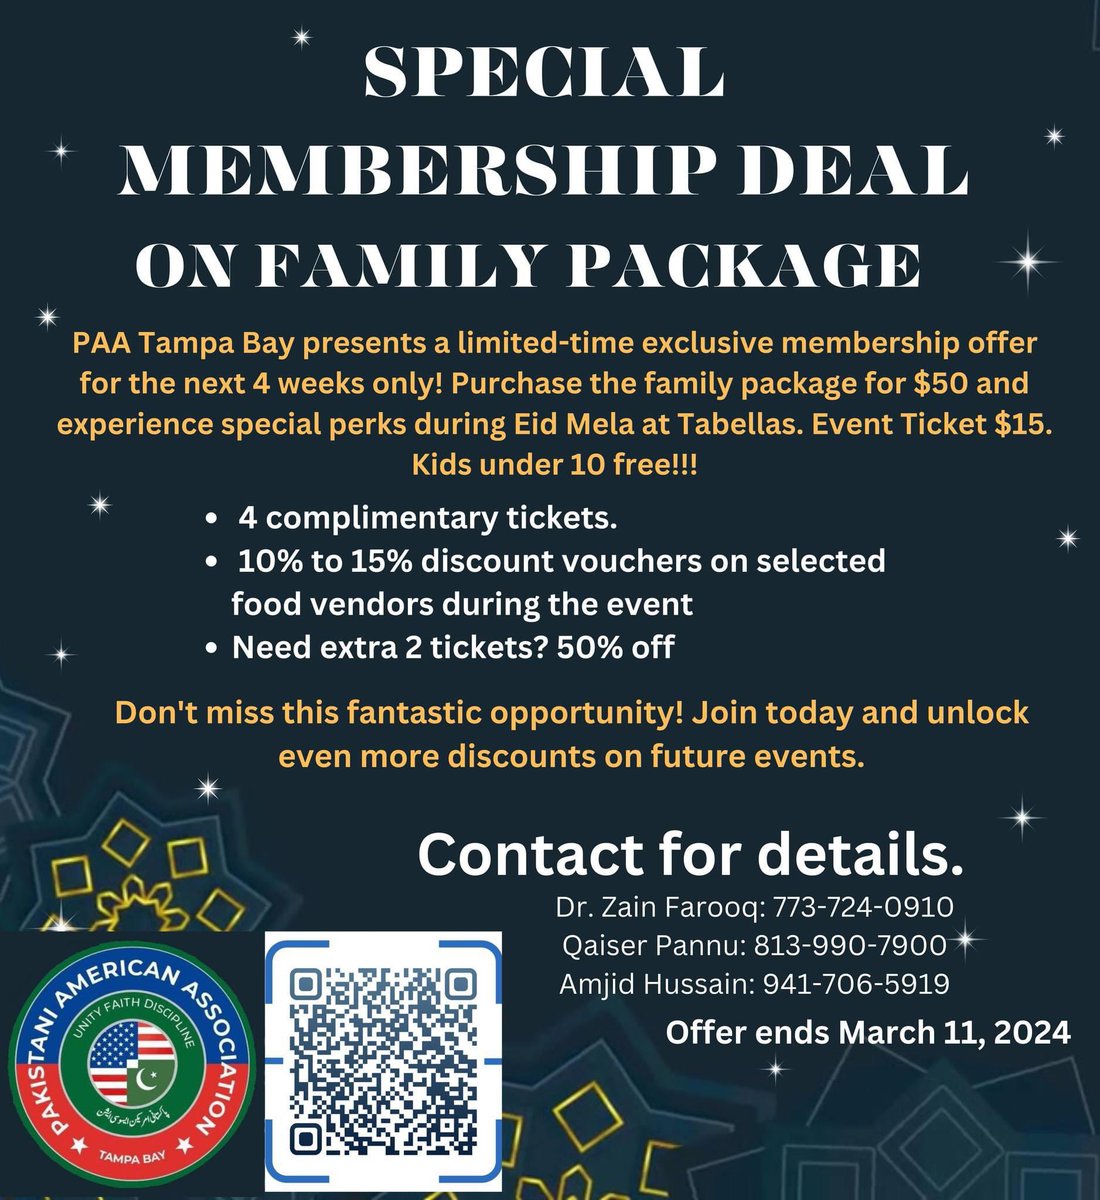 PAA Tampa Bay Membership Drive at Apna Bazaar! TODAY, Saturday, February 24 from 12 p.m., to 4 p.m. Buy your family membership for $50 and get 4 tickets free to Eid Mela. 🥳
#JoinPAA #PAATampabay #Pakistani #Pakistaniamerican #SpecialOffer